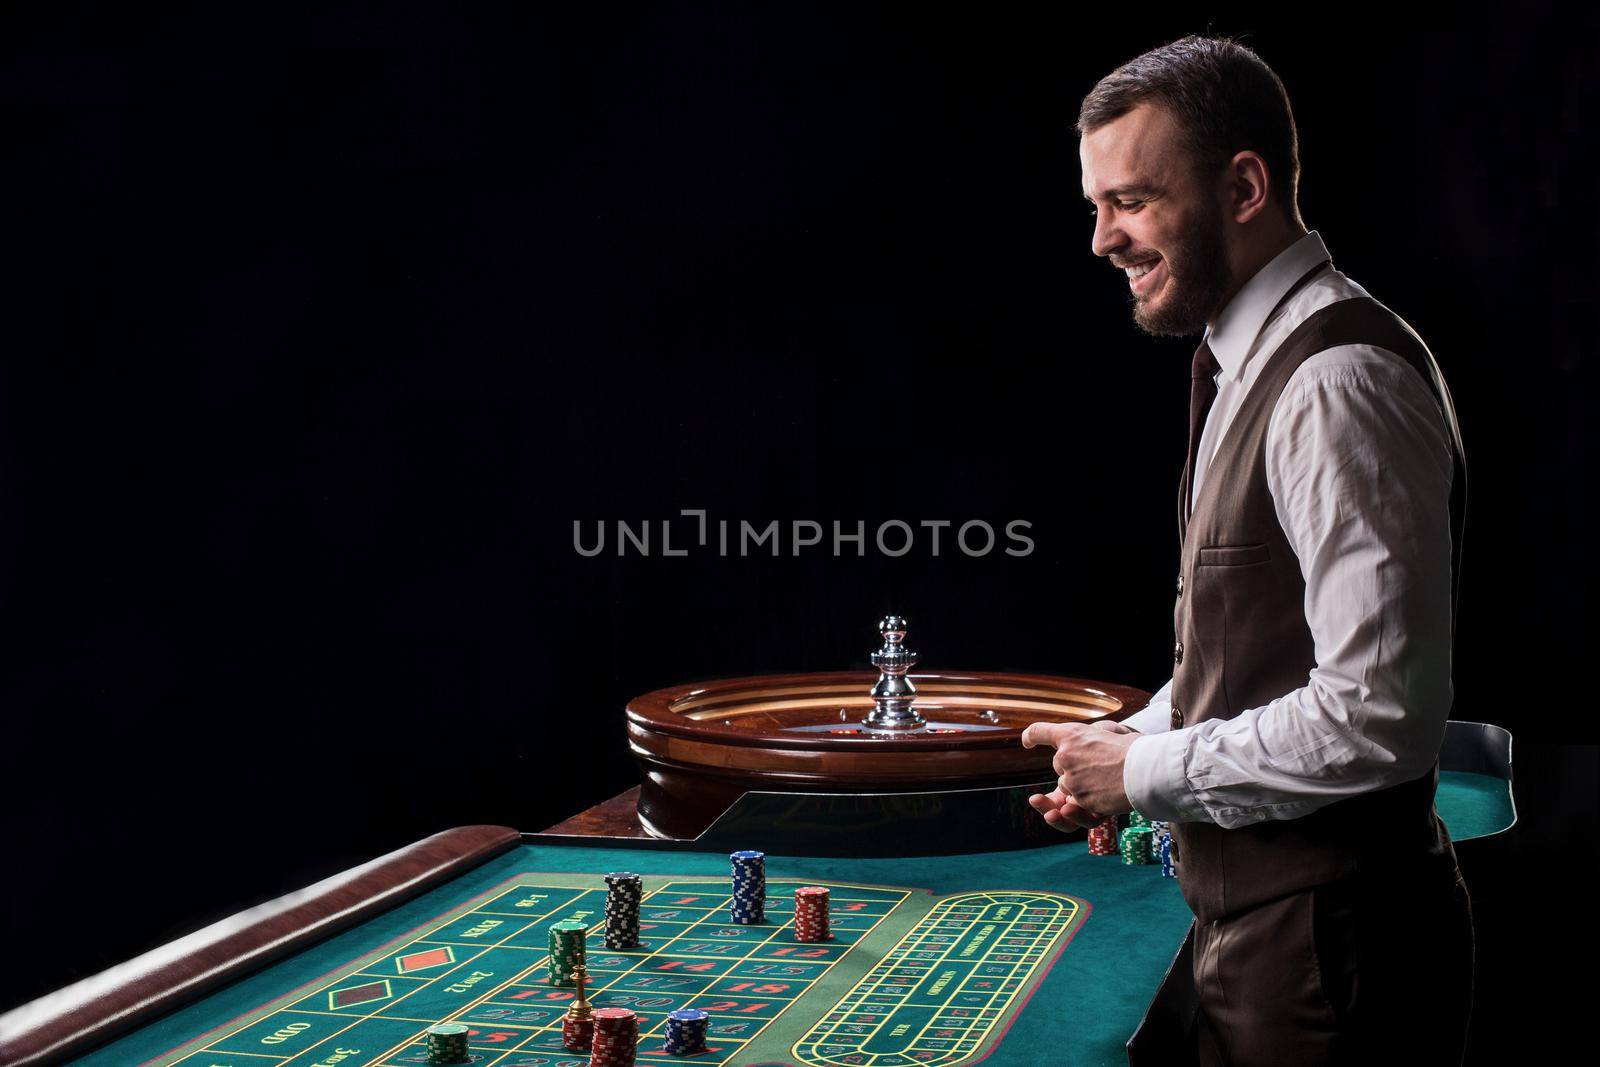 Croupier behind gambling table in a casino. by nazarovsergey